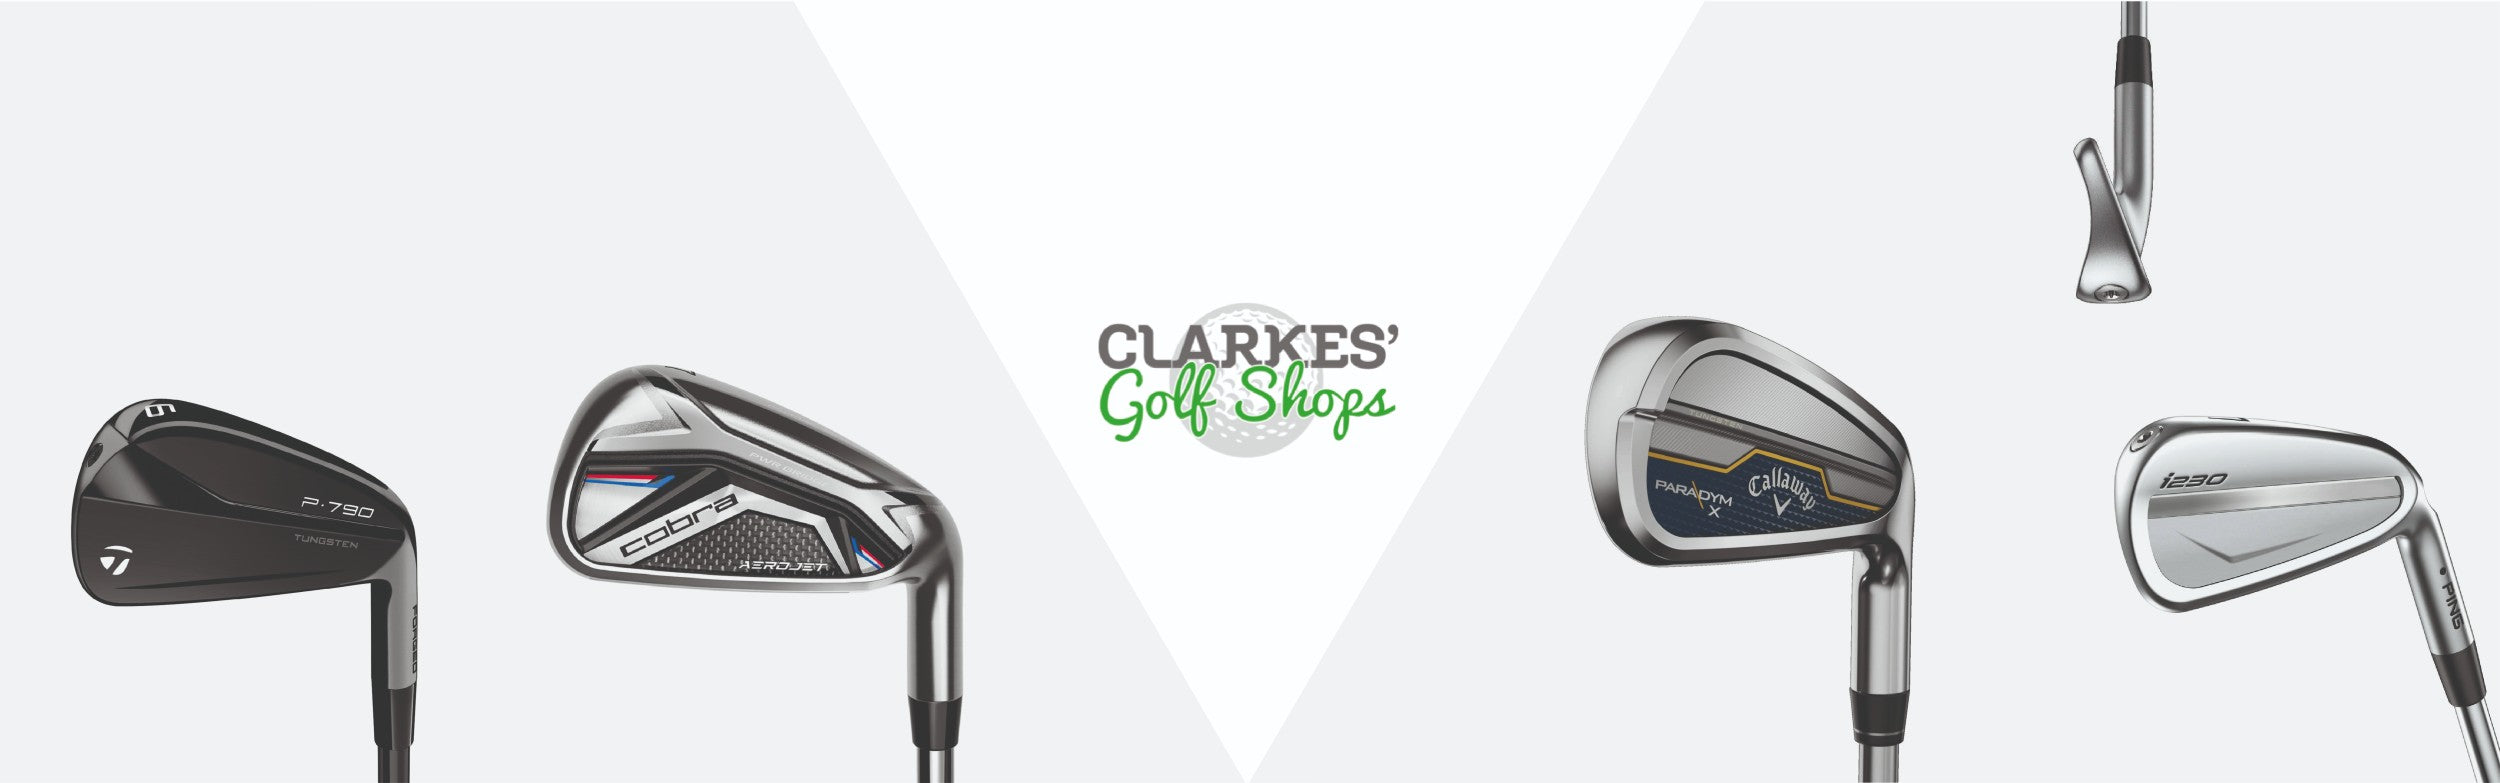 The Best Golf Irons For High Handicappers - Clarkes Golf